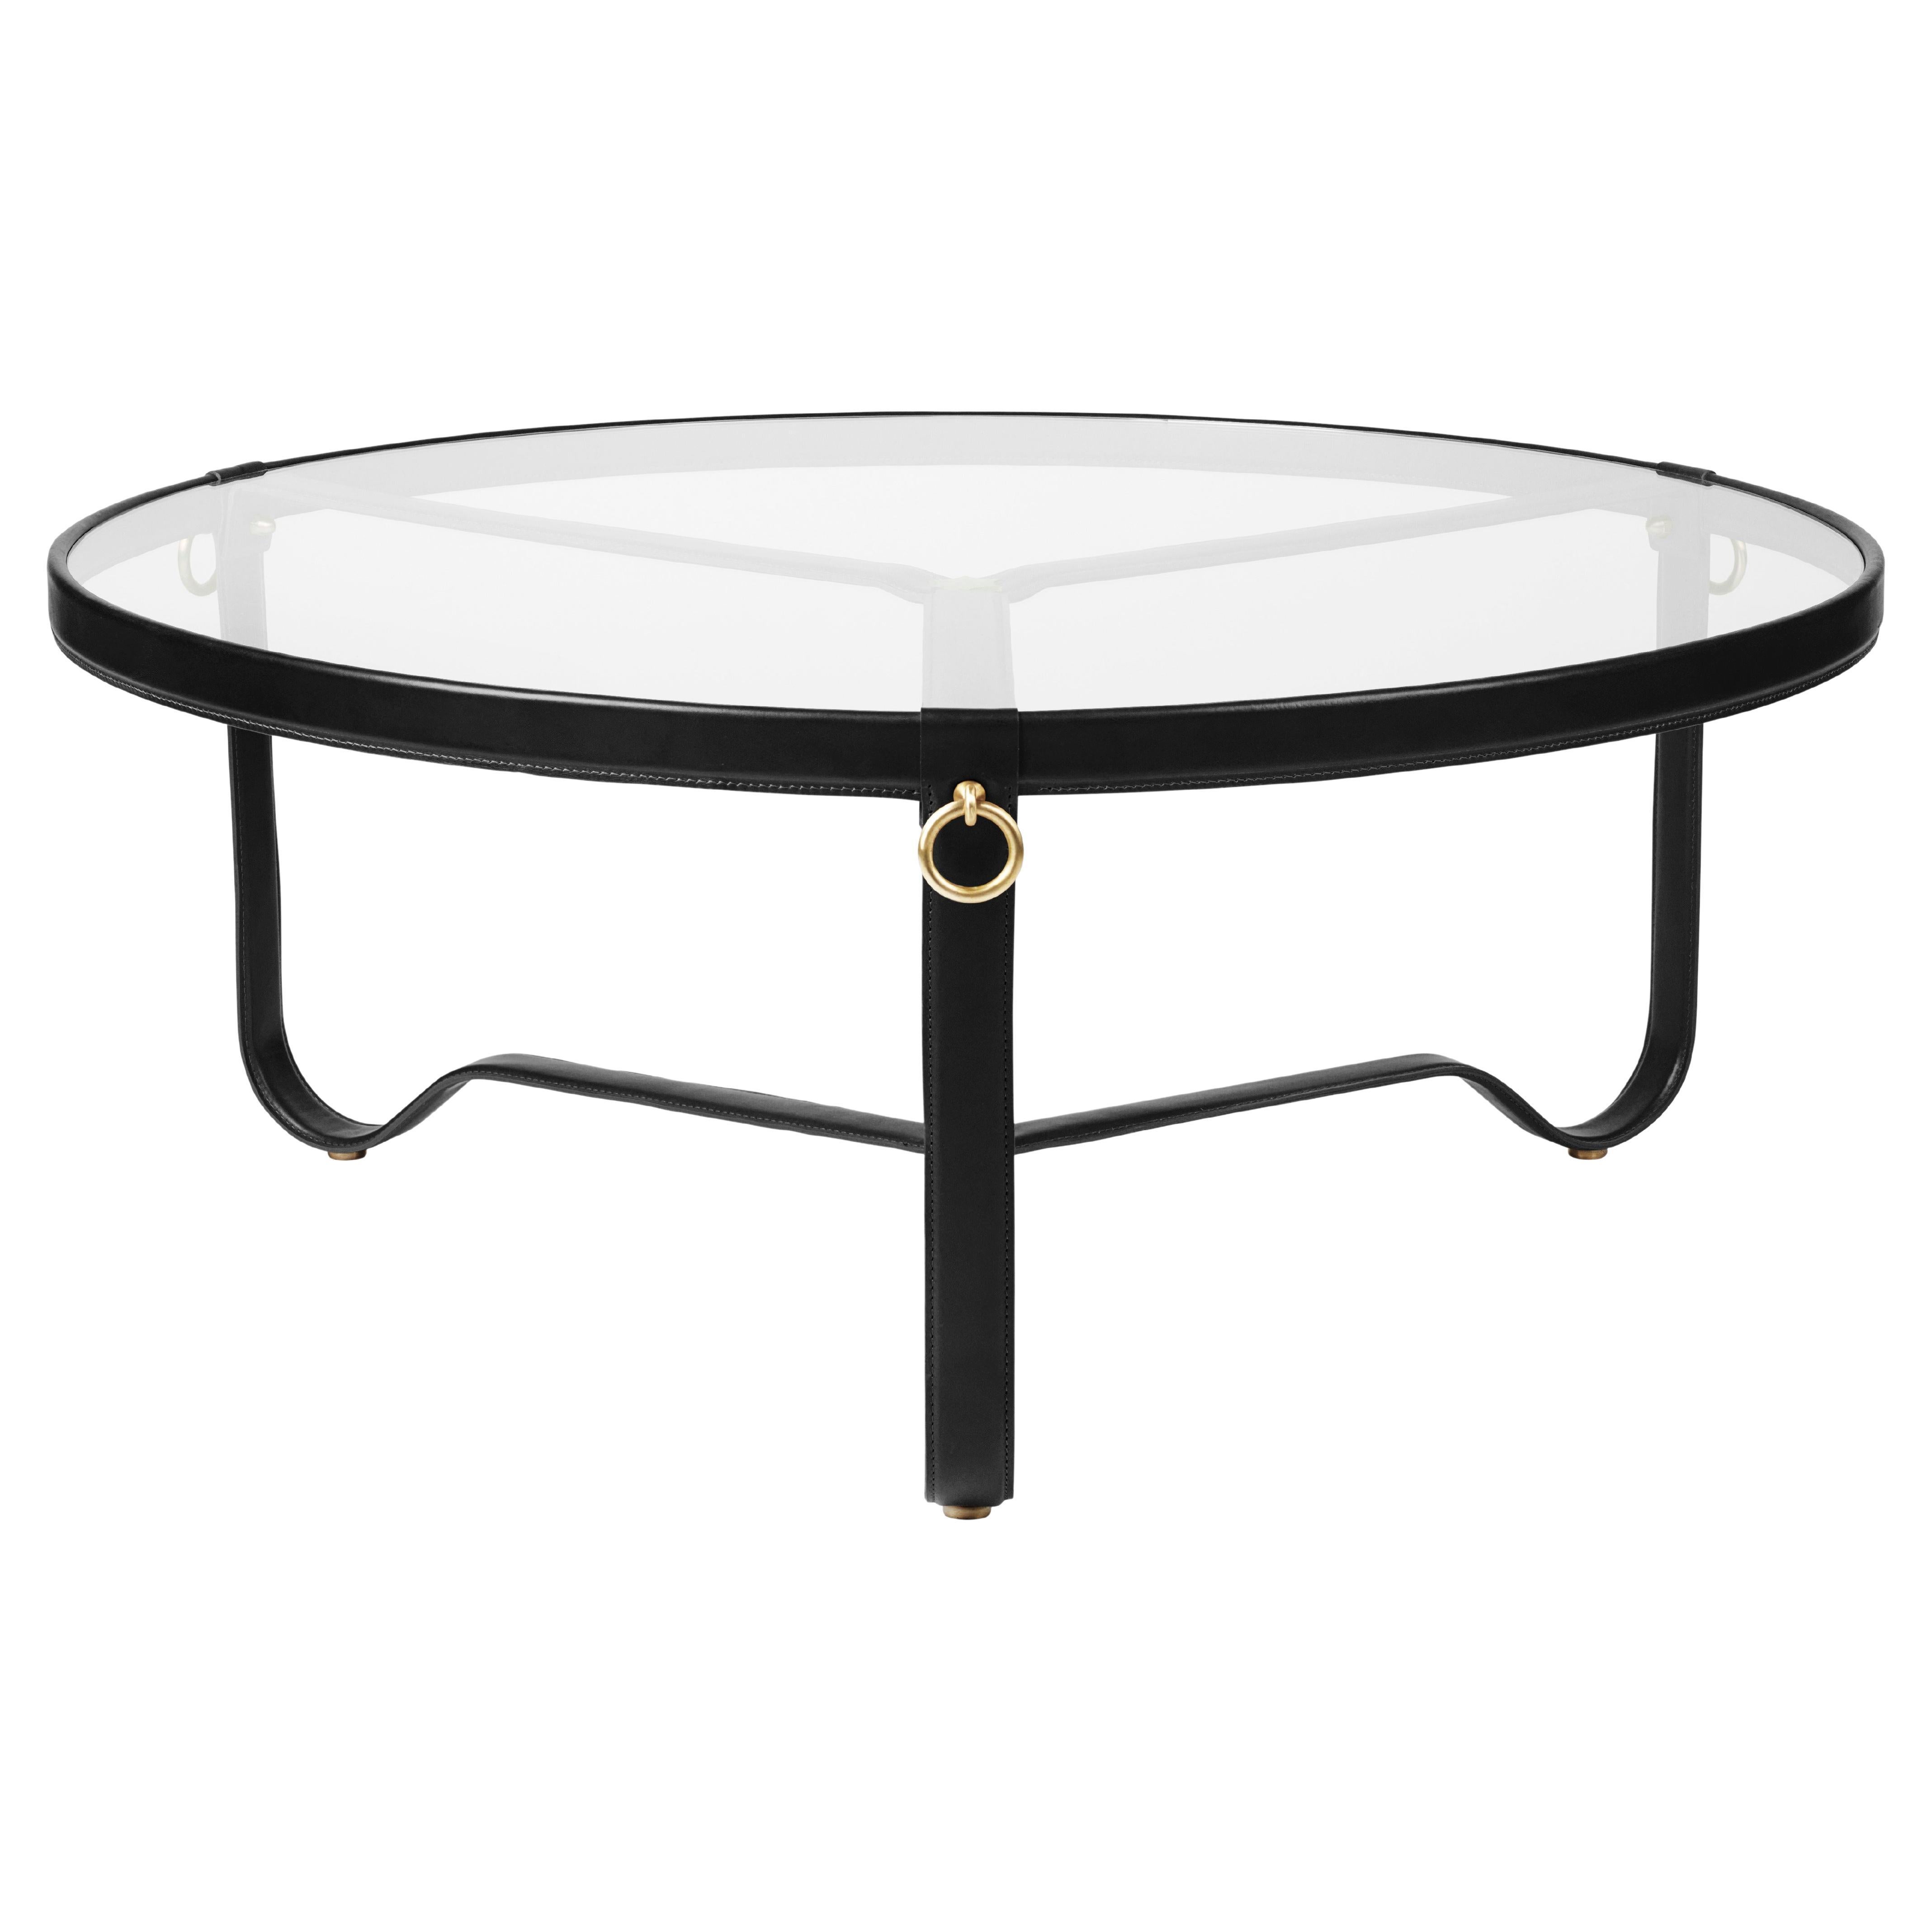 Large Jacques Adnet 'Circulaire' Glass and Black Leather Coffee Table for GUBI For Sale